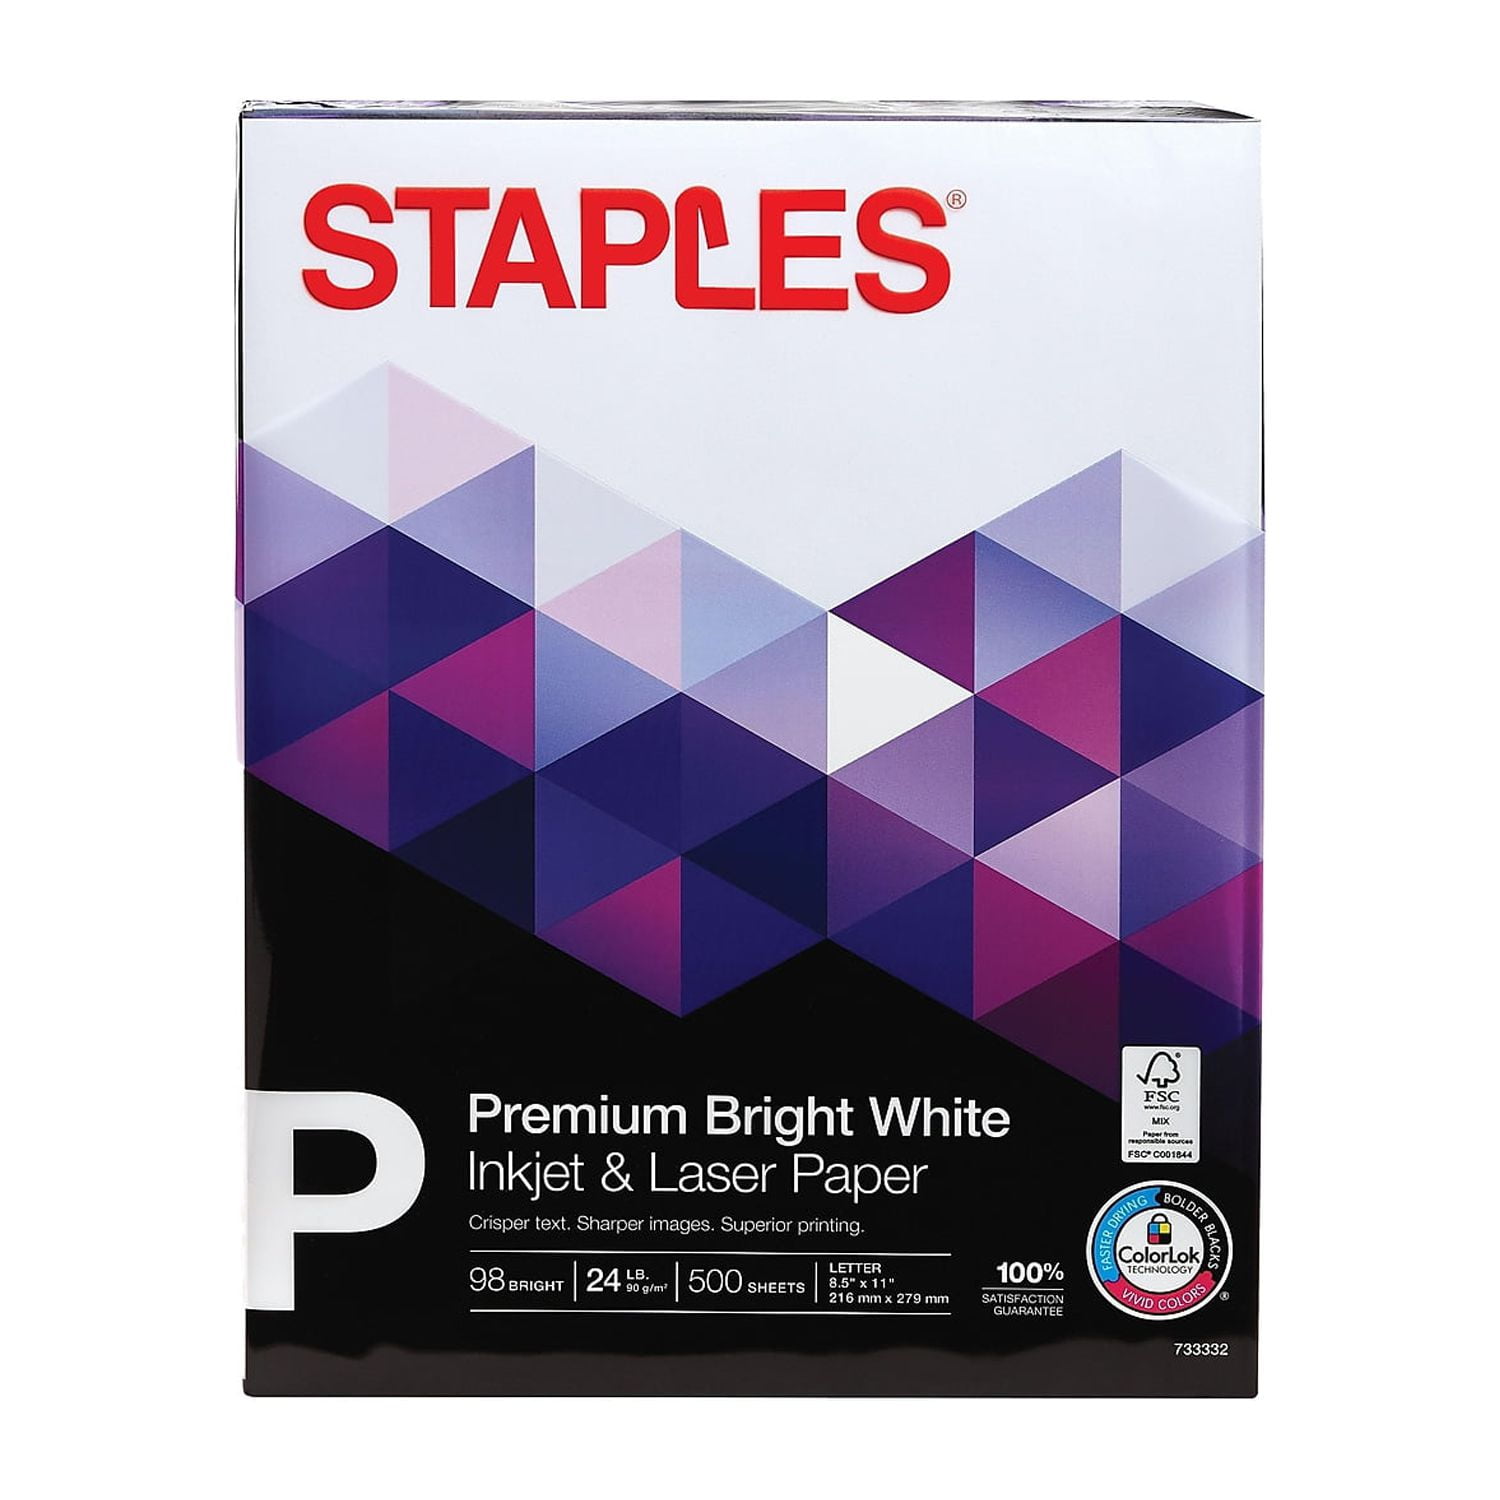 Staples 65 lb. Cardstock Paper, 8.5 x 11, Assorted Colors, 400  Sheets/Pack (25496), Staples